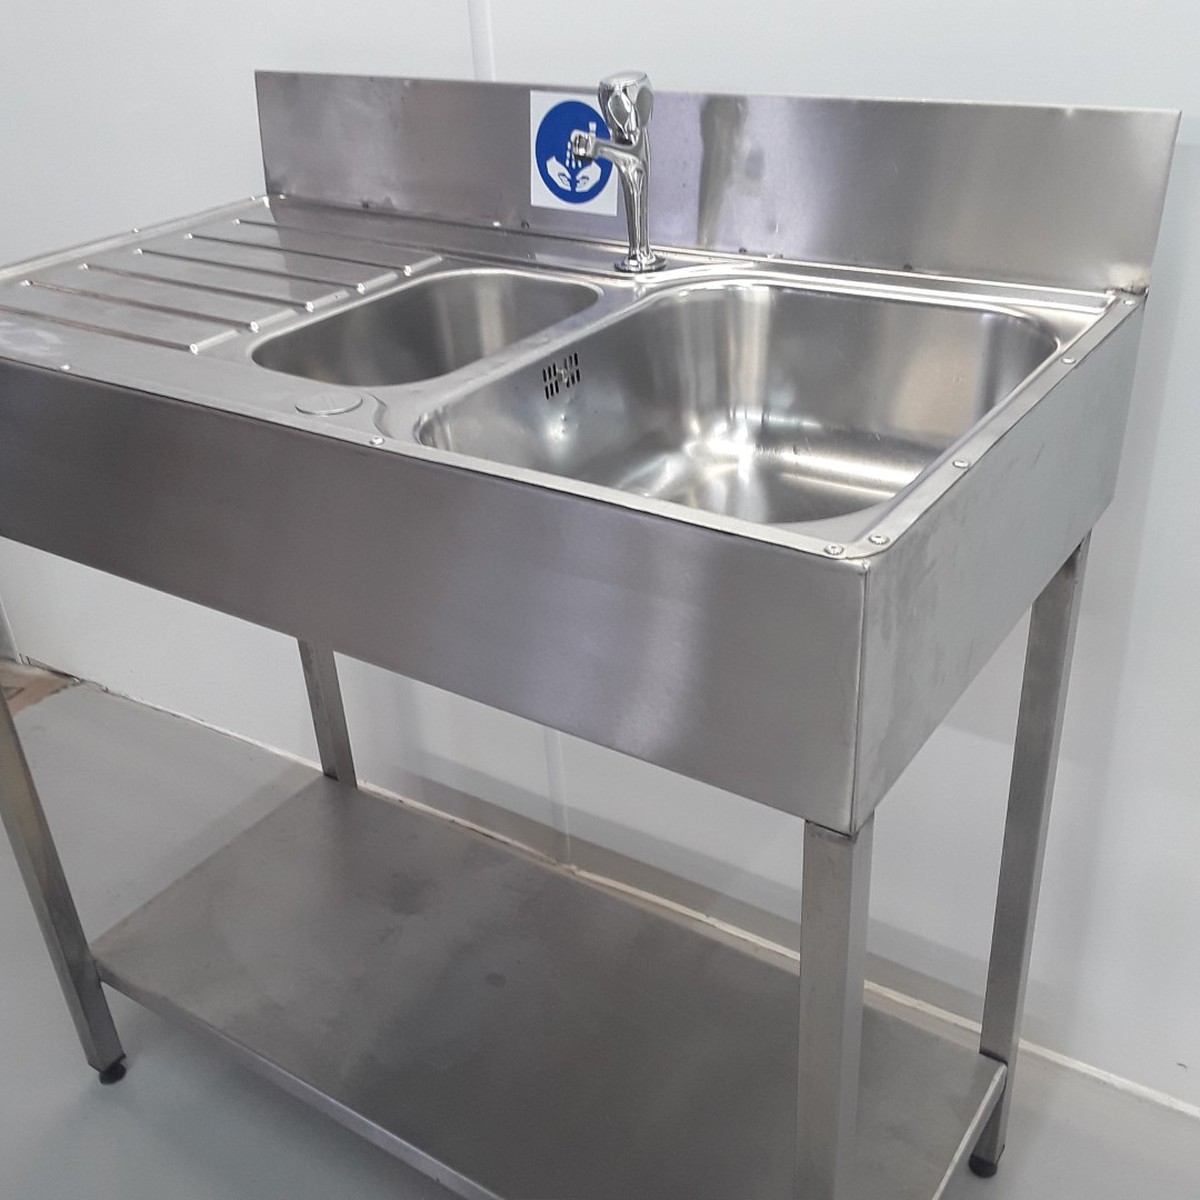 Secondhand Catering Equipment Double Sinks Used 